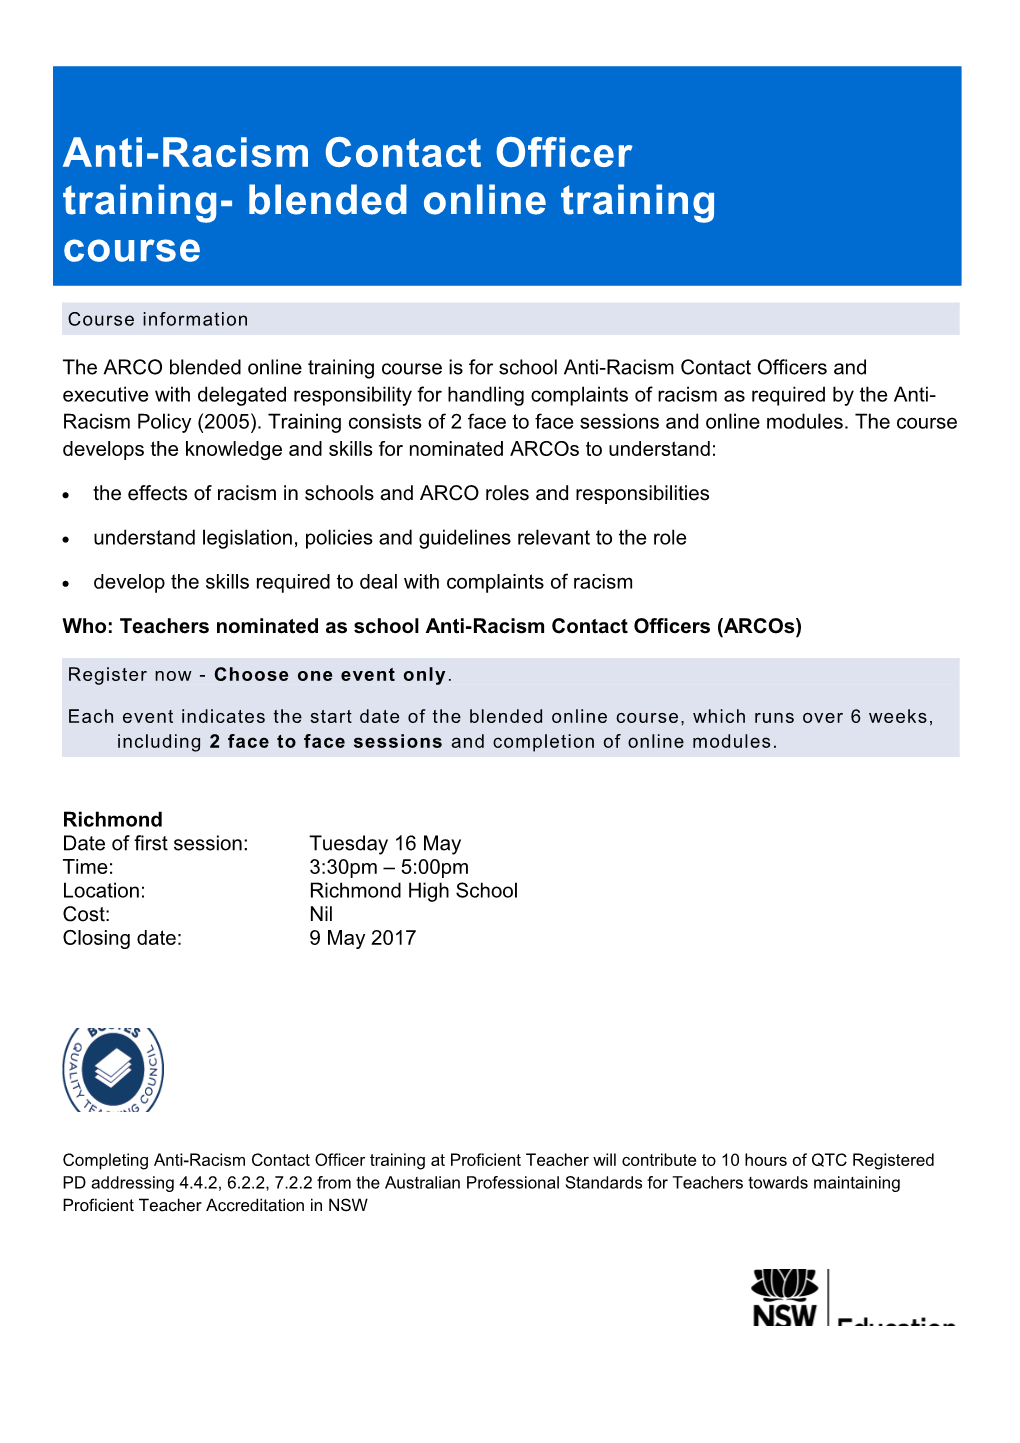 Course Information s14